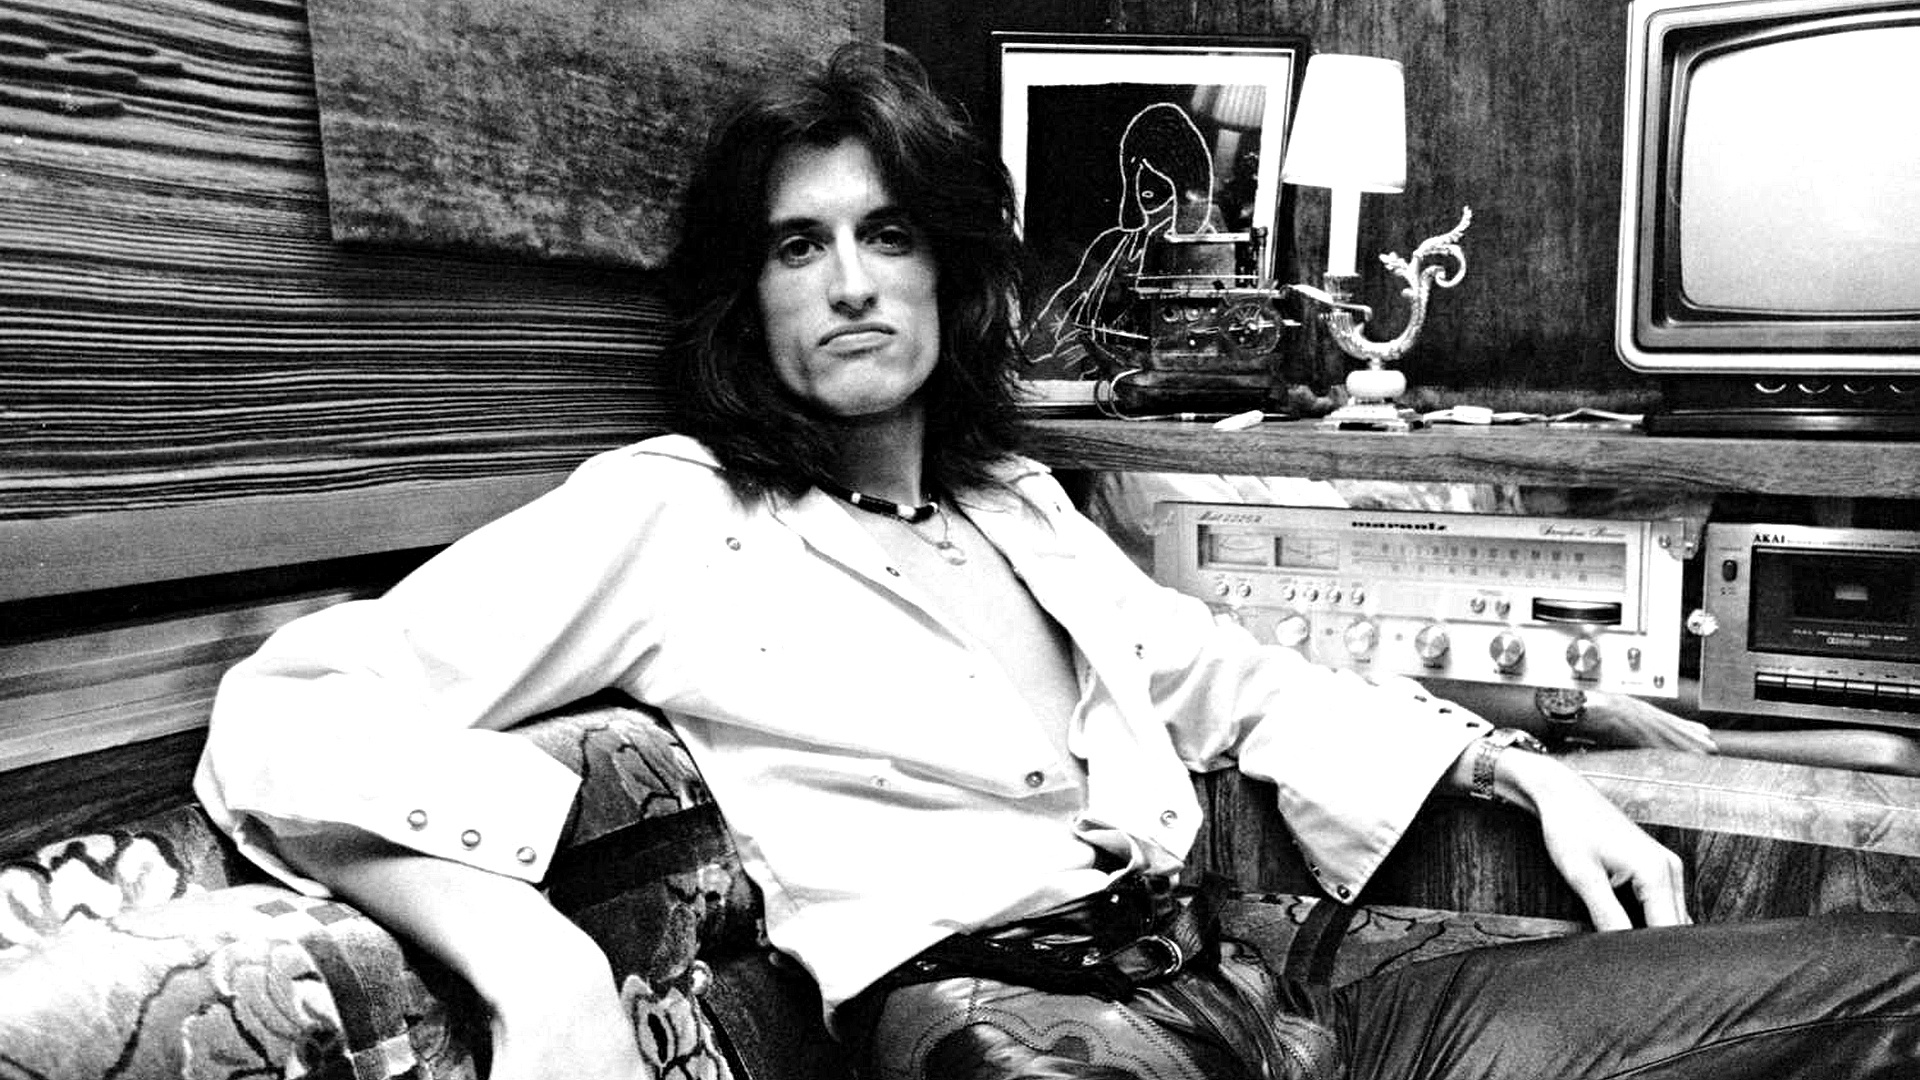 Joe Perry Wallpaper posted by Christopher Walker 1920x1080